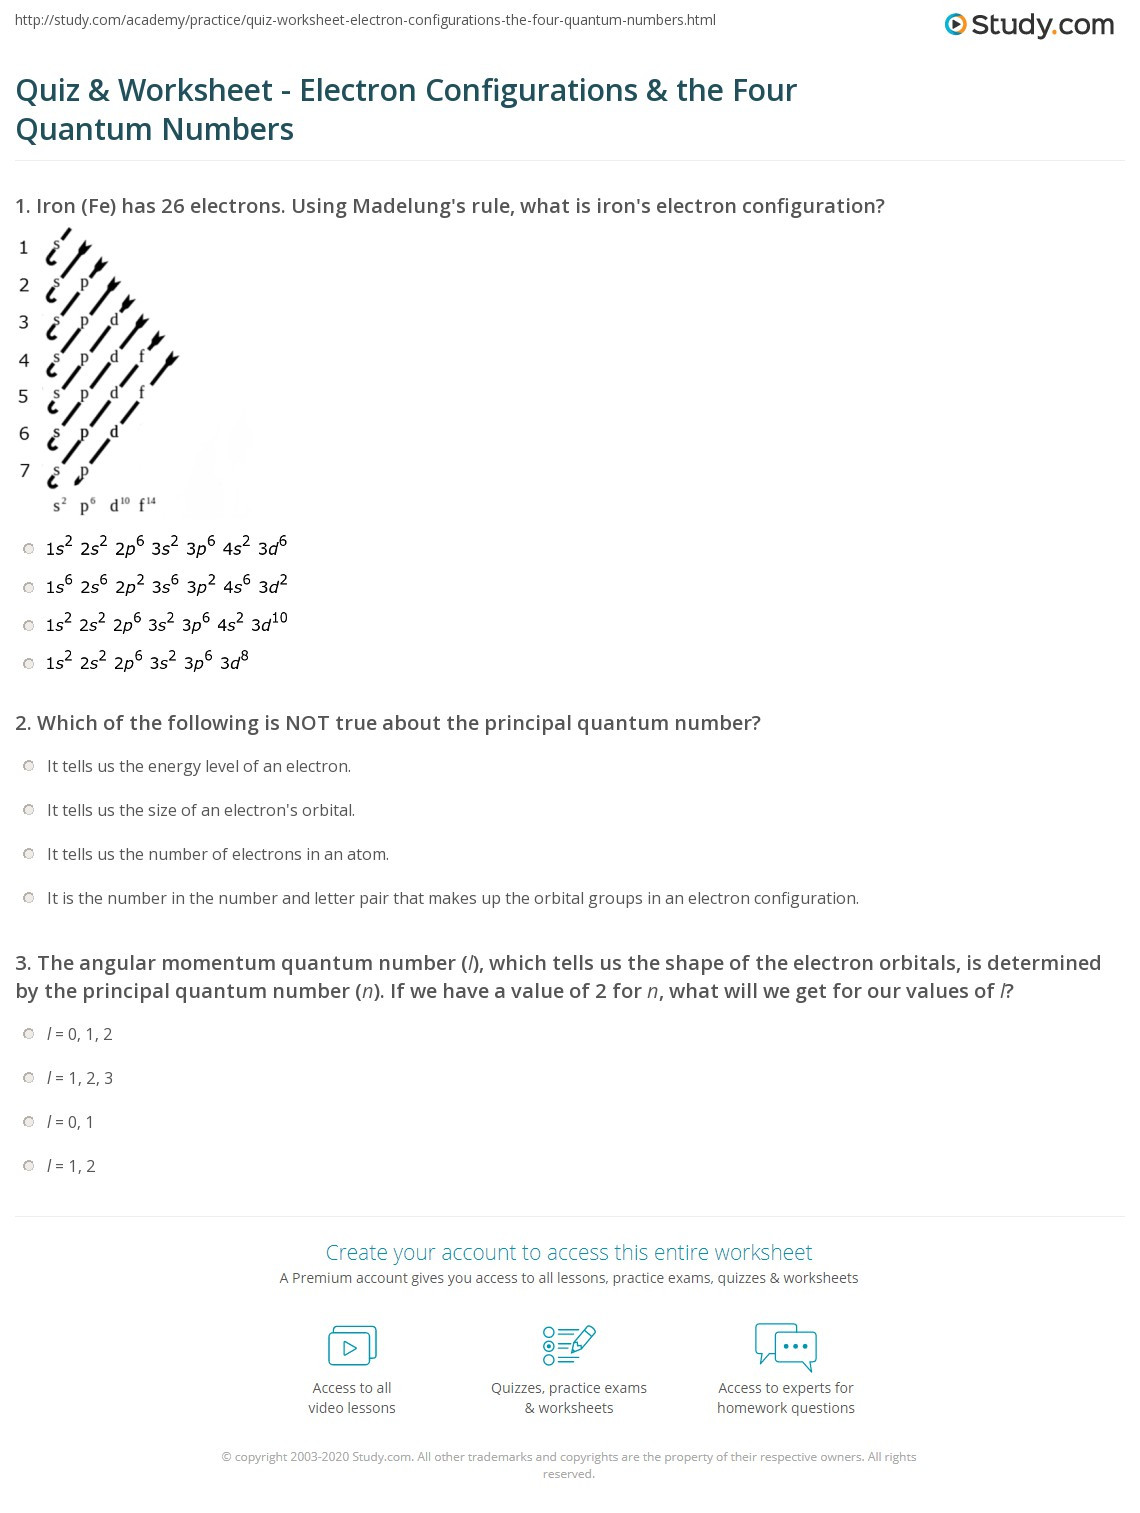 Electron Configuration Practice Worksheet Answers Quiz &amp; Worksheet Electron Configurations &amp; the Four